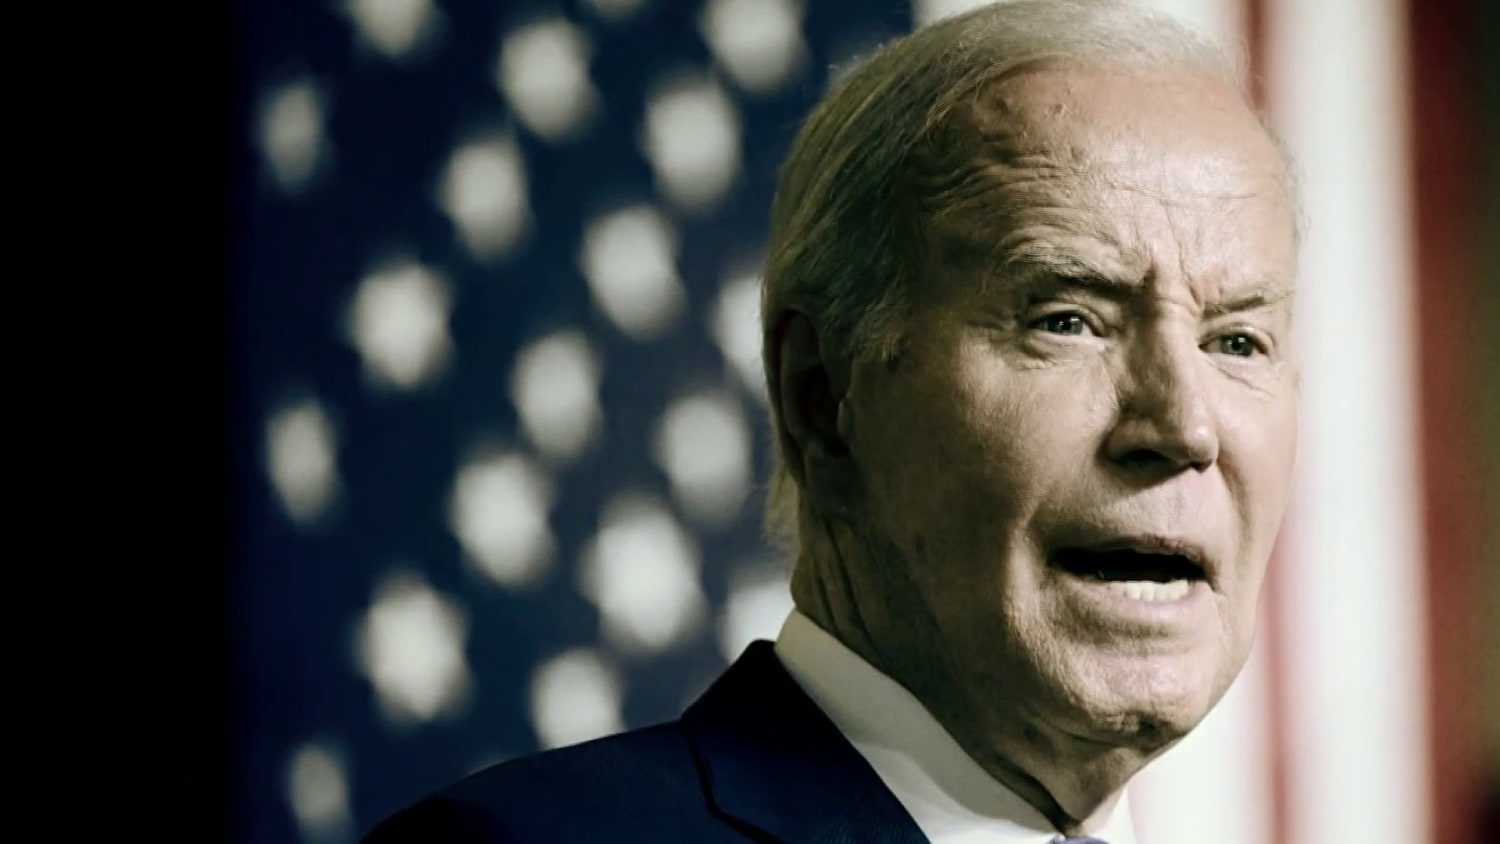 New fallout after Biden threatens to withhold some weapons from Israel